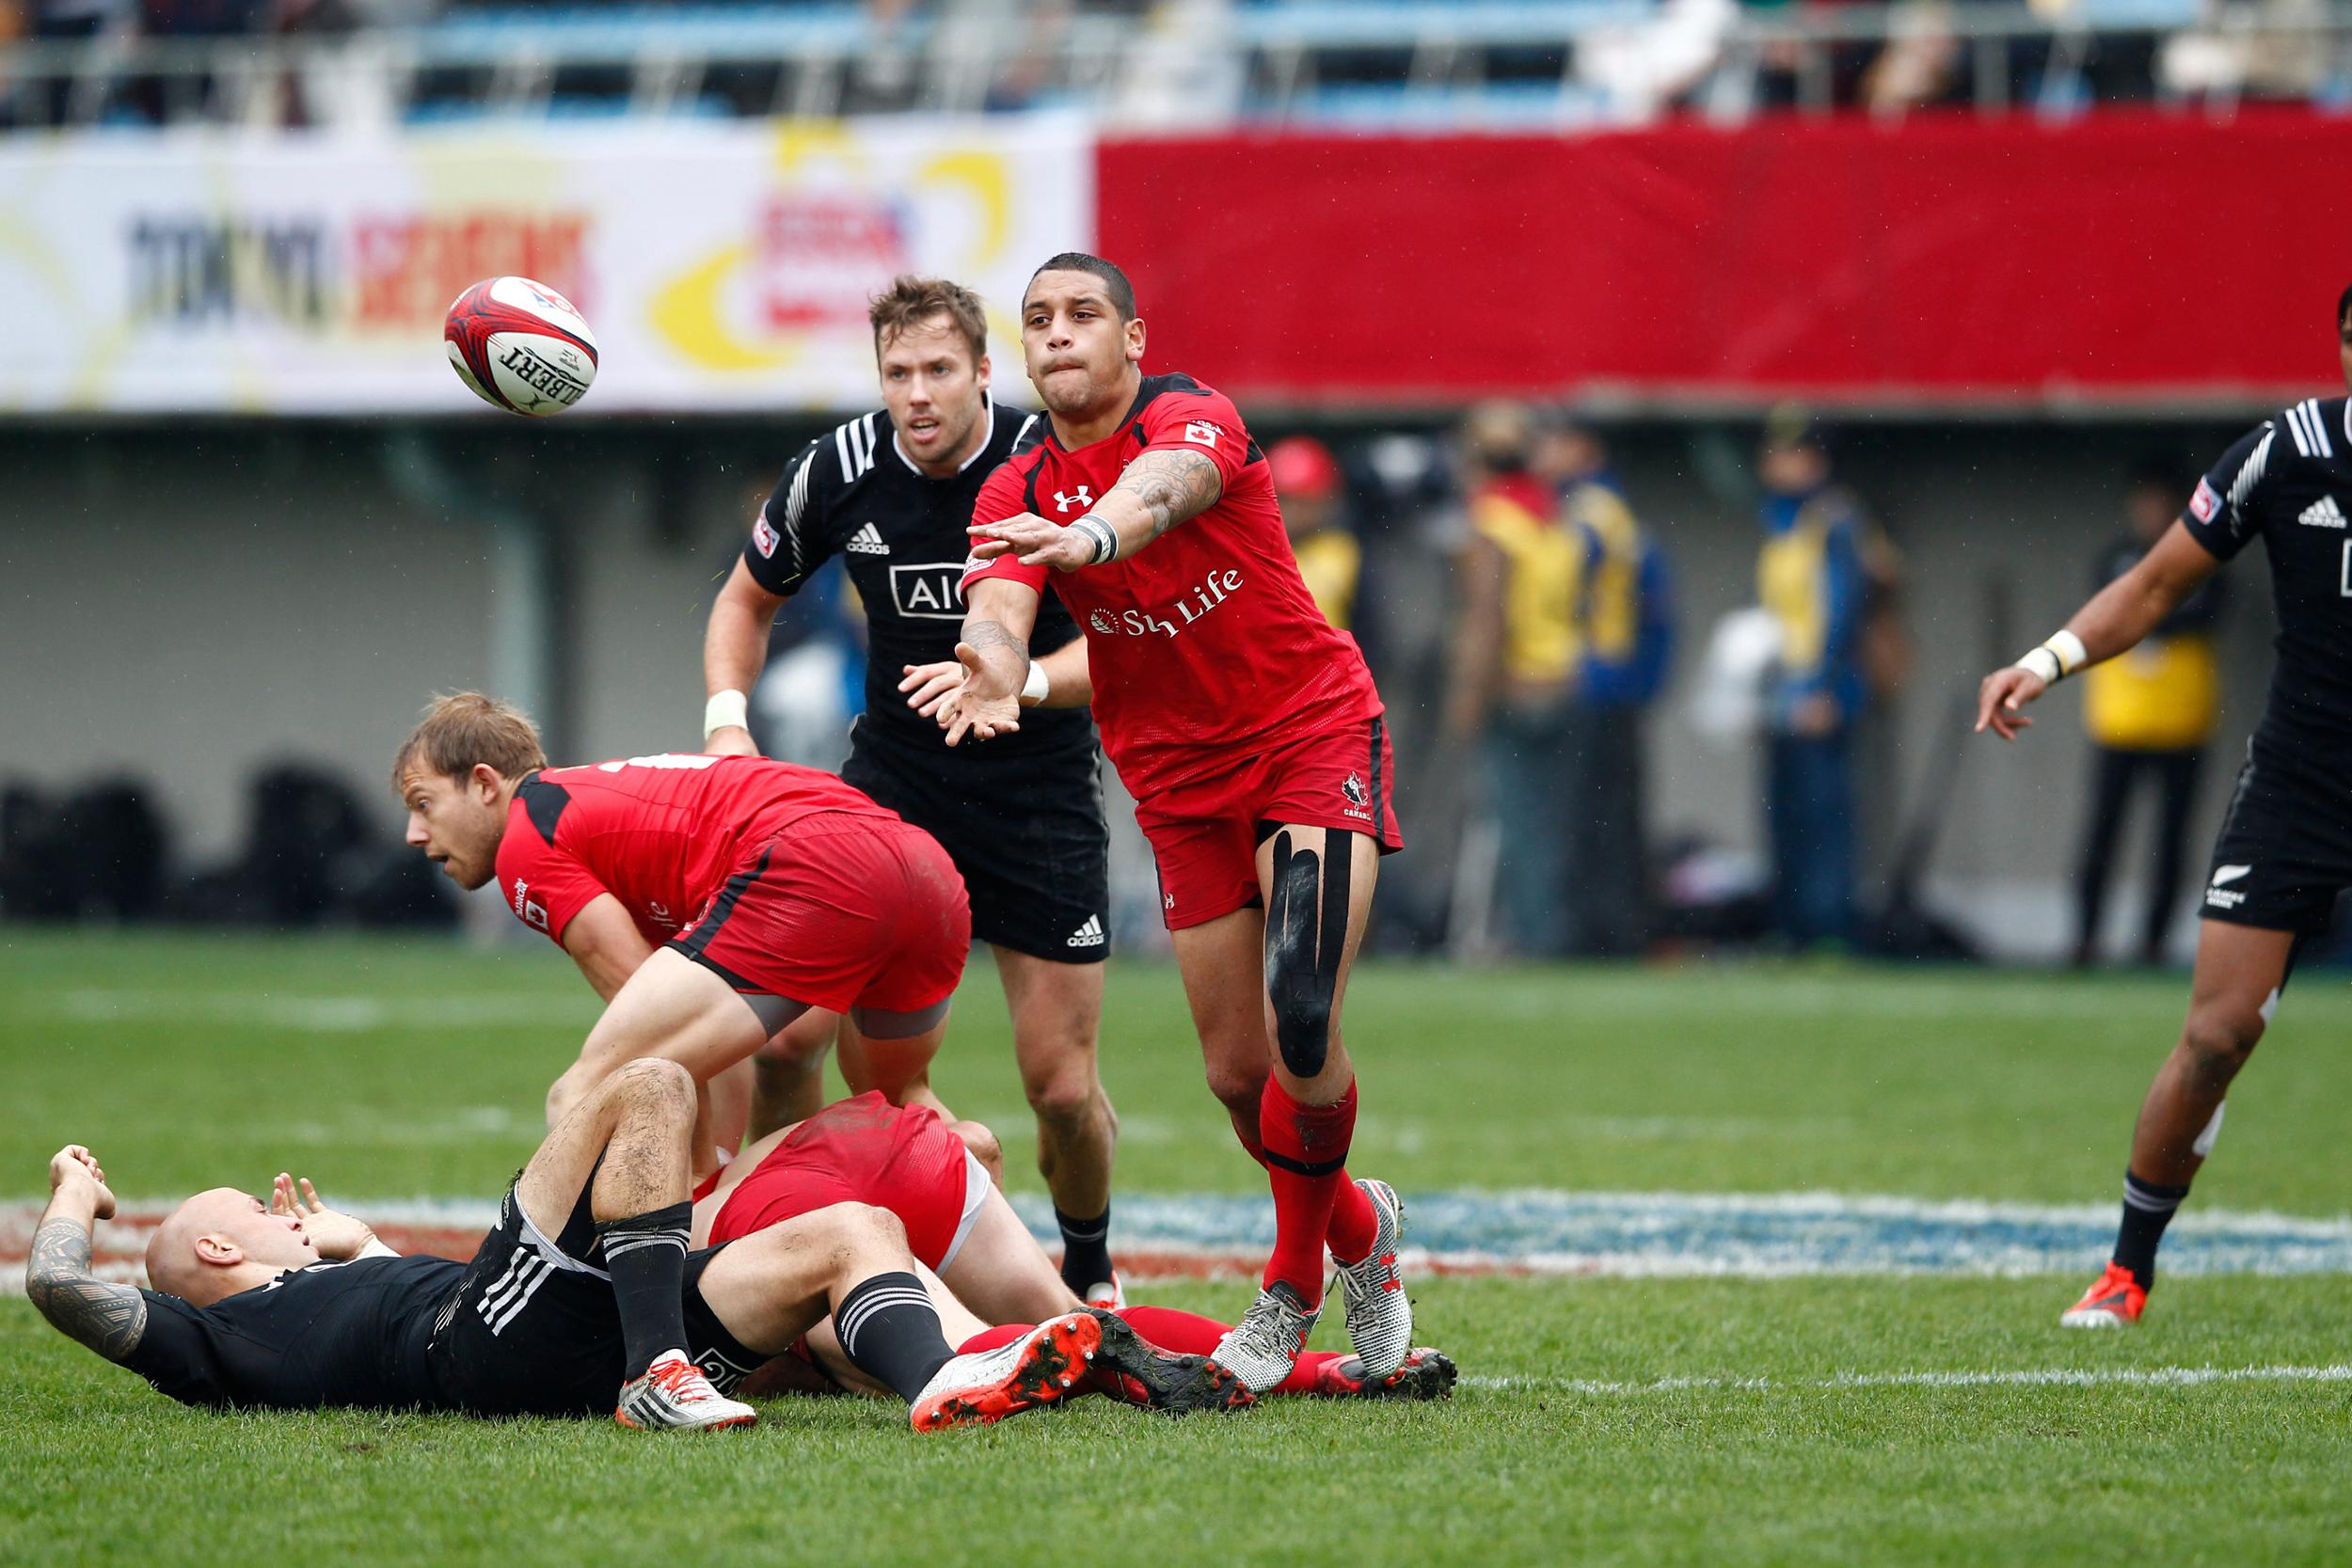 Canada provided one of the shocks of the day as they beat New Zealand for the first time to reach the semi-finals in Tokyo ©World Rugby/Martin Seras Lima